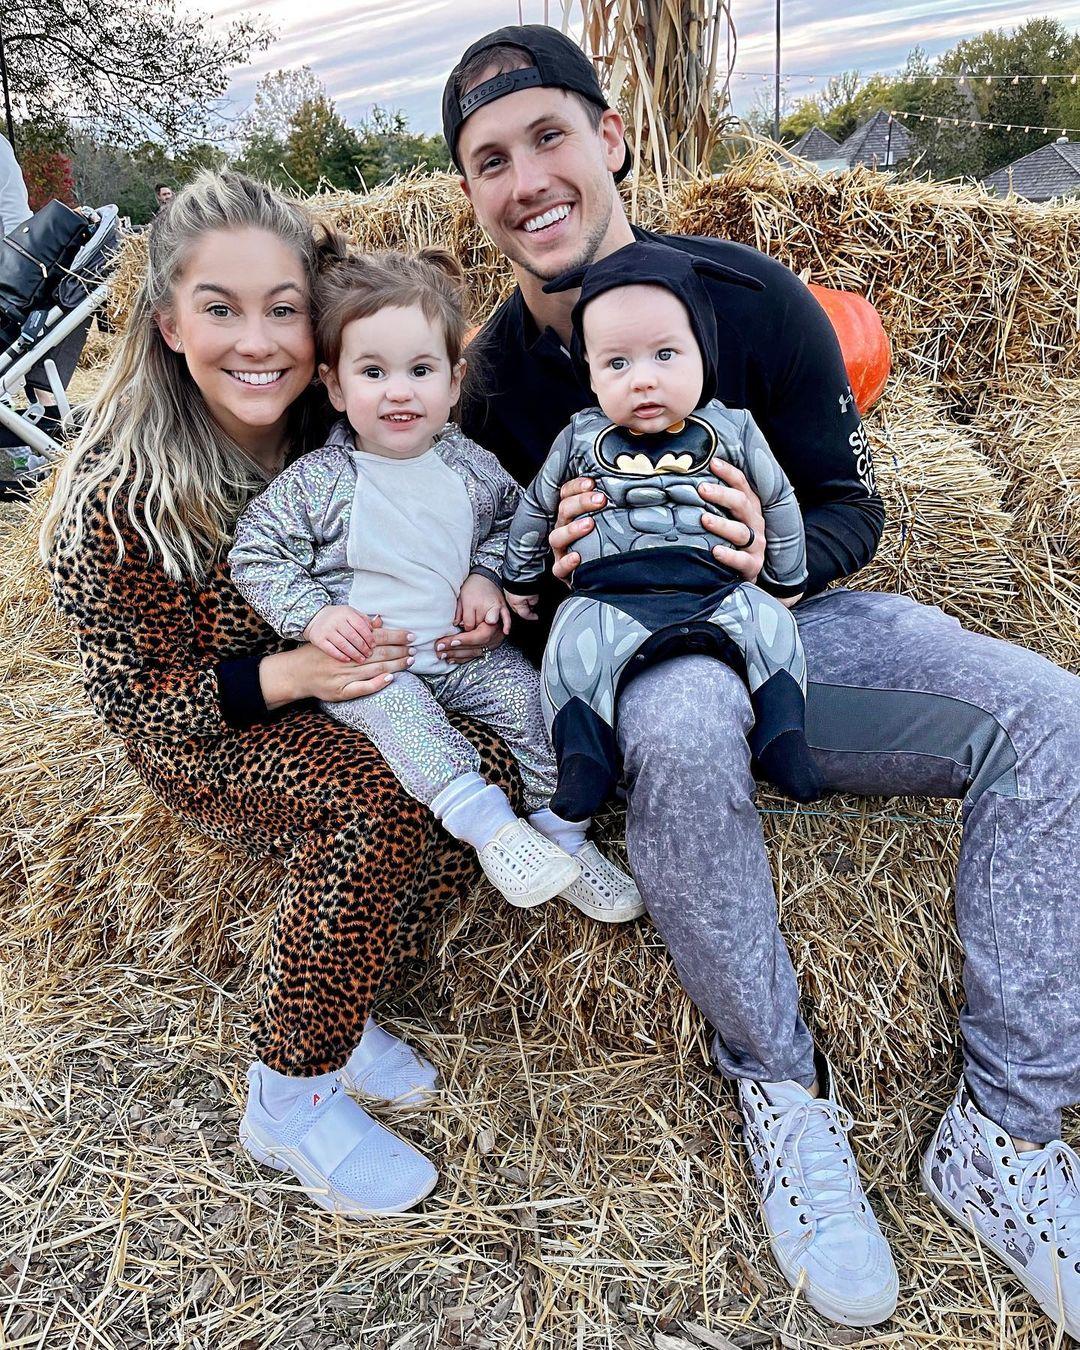 Shawn Johnson East and her family